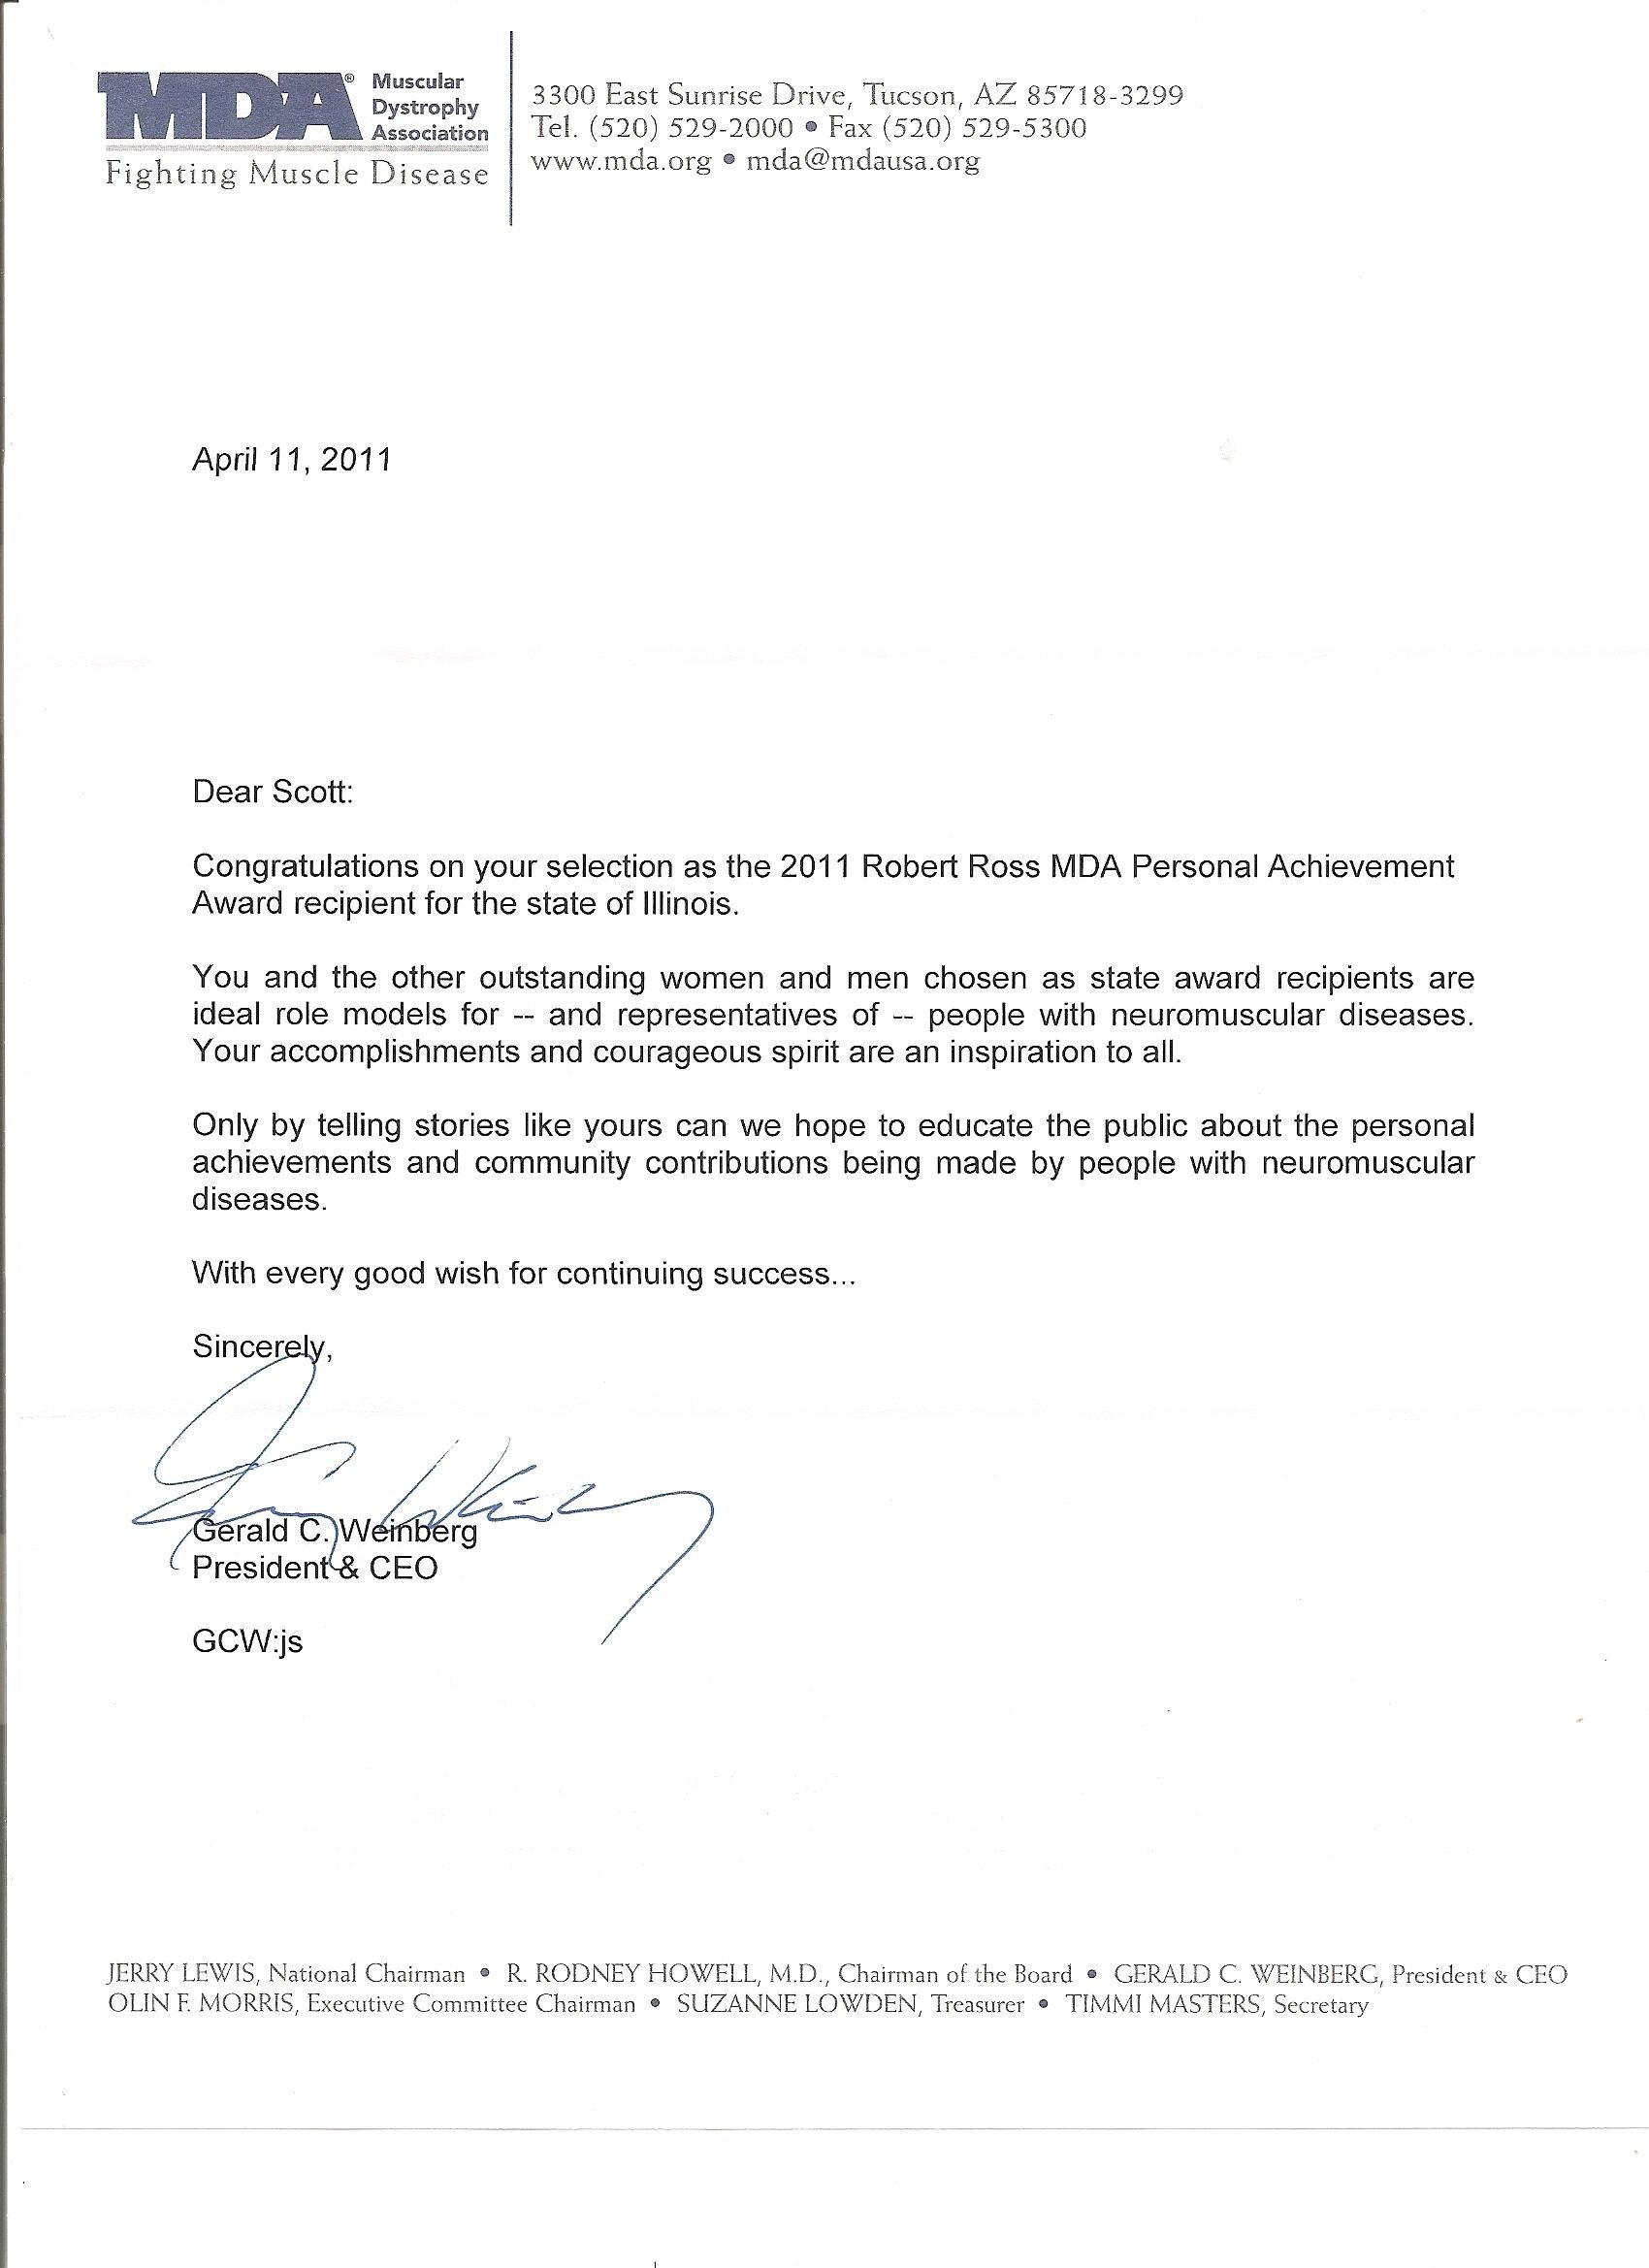 Congratulation Letter On Achievement Congratulations Letter From the President and Ceo Of the